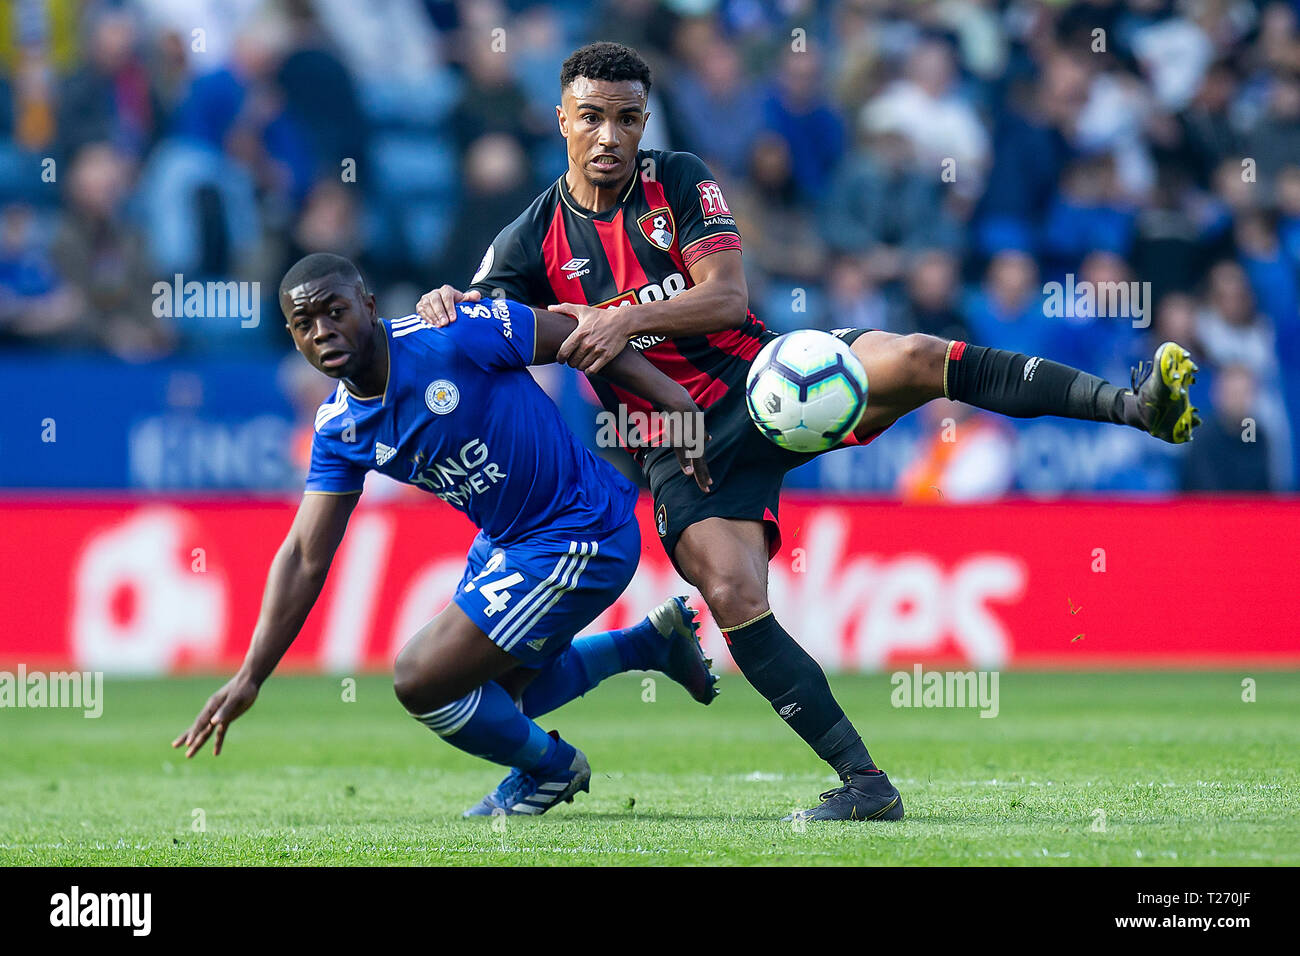 LEICESTER, UK 30th March     Junior Stanislas of Bournemouth battling for the ball with Nampalys Mendy of Leicester City during the Premier League match between Leicester City and Bournemouth at the King Power Stadium, Leicester on Saturday 30th March 2019. (Credit: Alan Hayward | MI News)  Editorial use only, license required for commercial use. No use in betting, games or a single club/league/player publications. Photograph may only be used for newspaper and/or magazine editorial purposes. May not be used for publications involving 1 player, 1 club or 1 competition without written authorisat Stock Photo